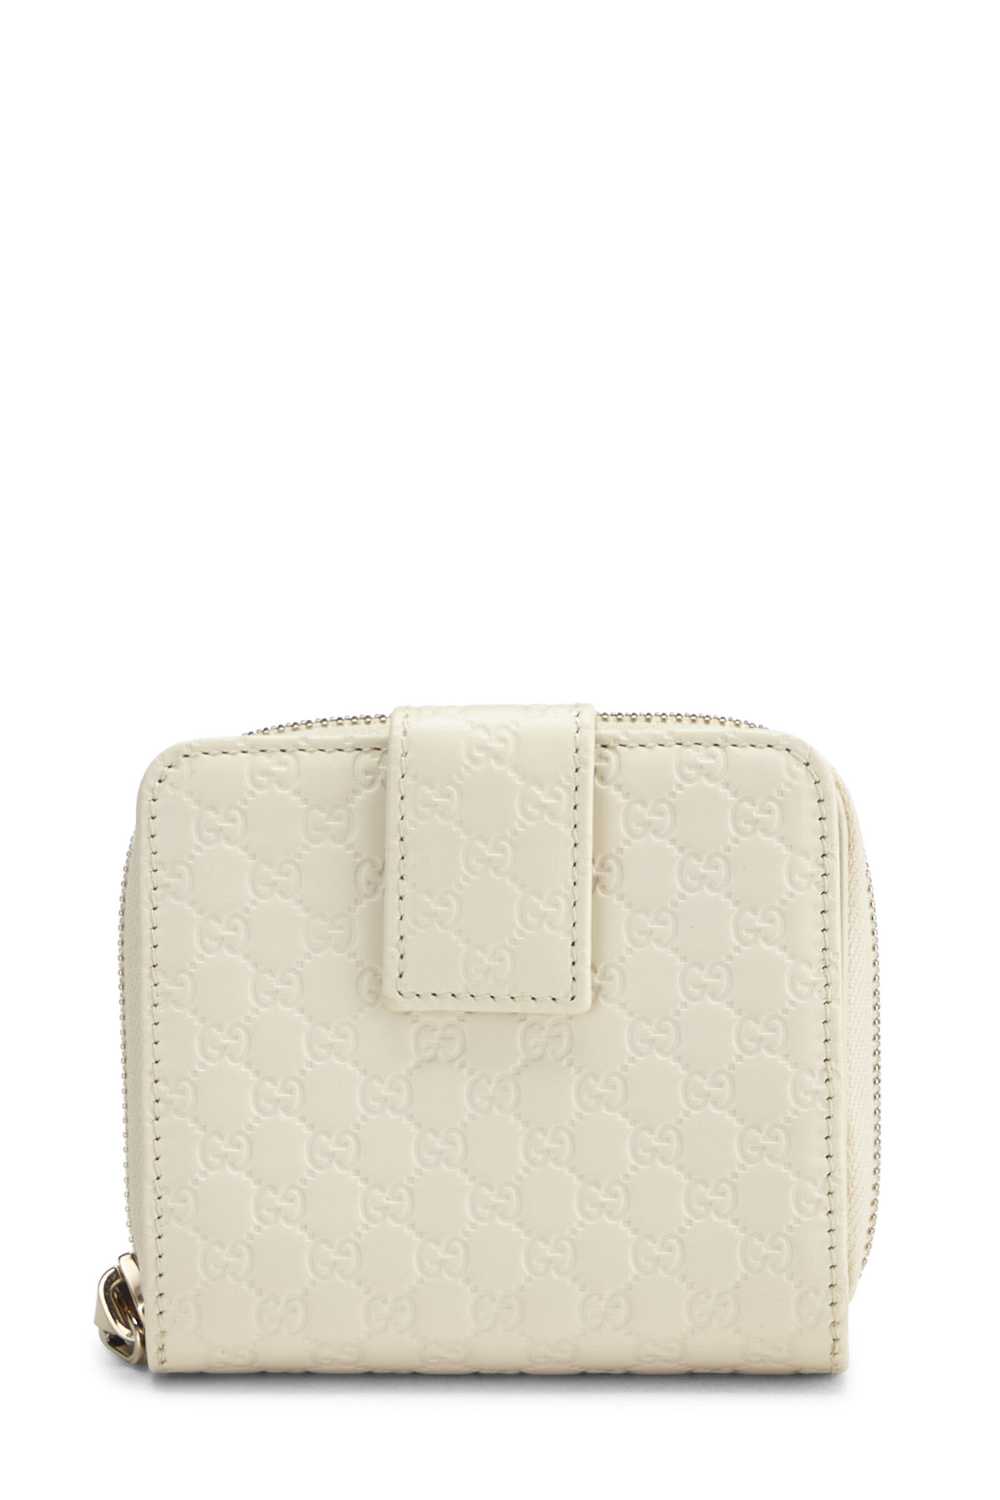 White Microguccissima French Compact Zip Wallet - image 3